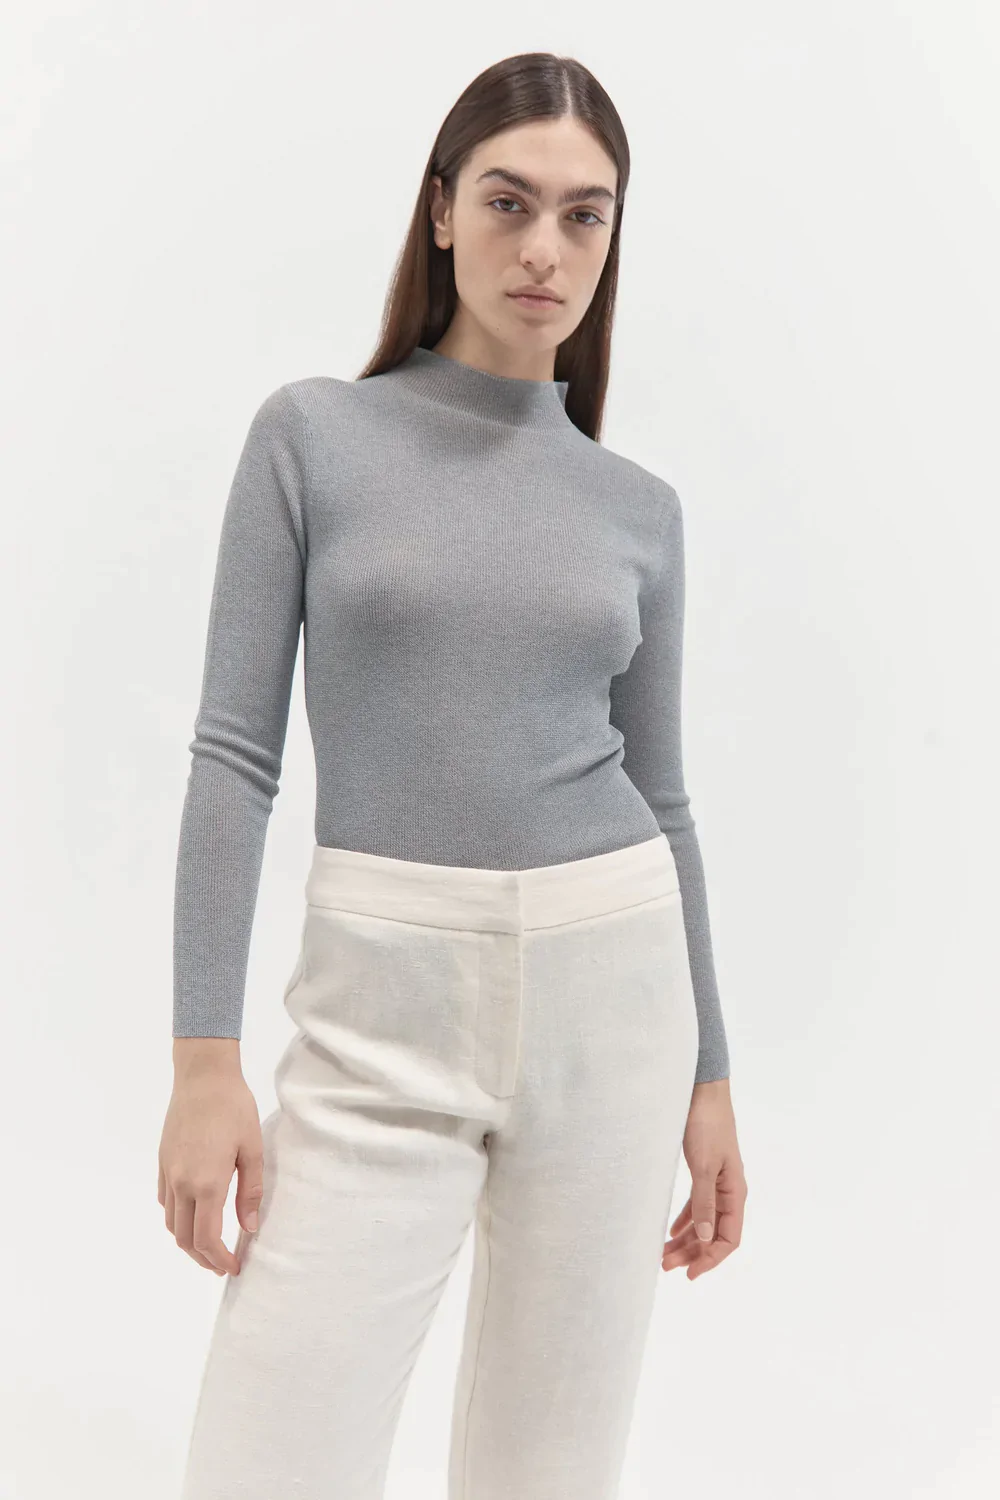 Product Image for Long Sleeve High Neck Knit Top, Light Grey